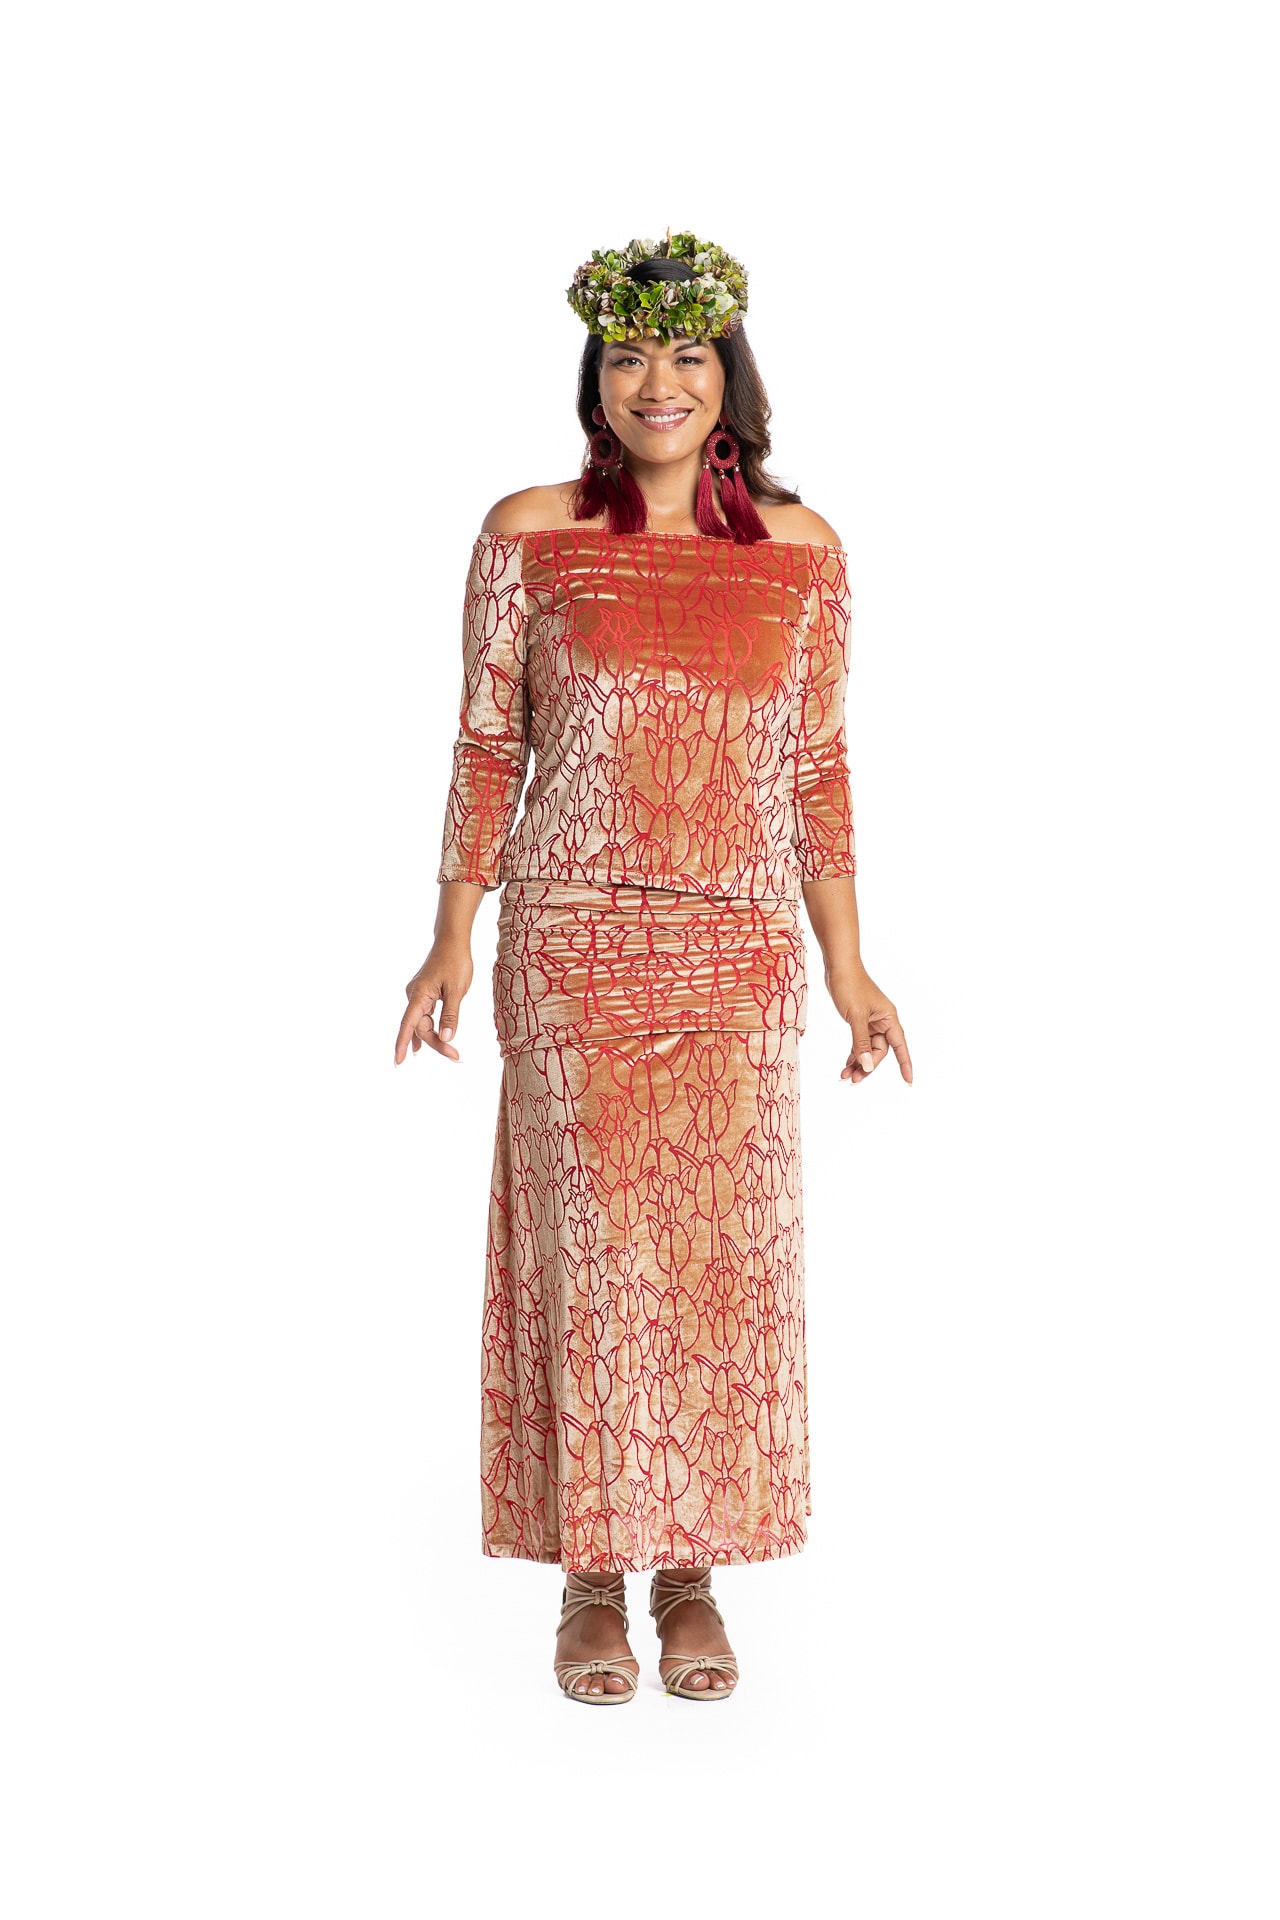 Model wearing Poohiwi Dress in Apricot - Front View